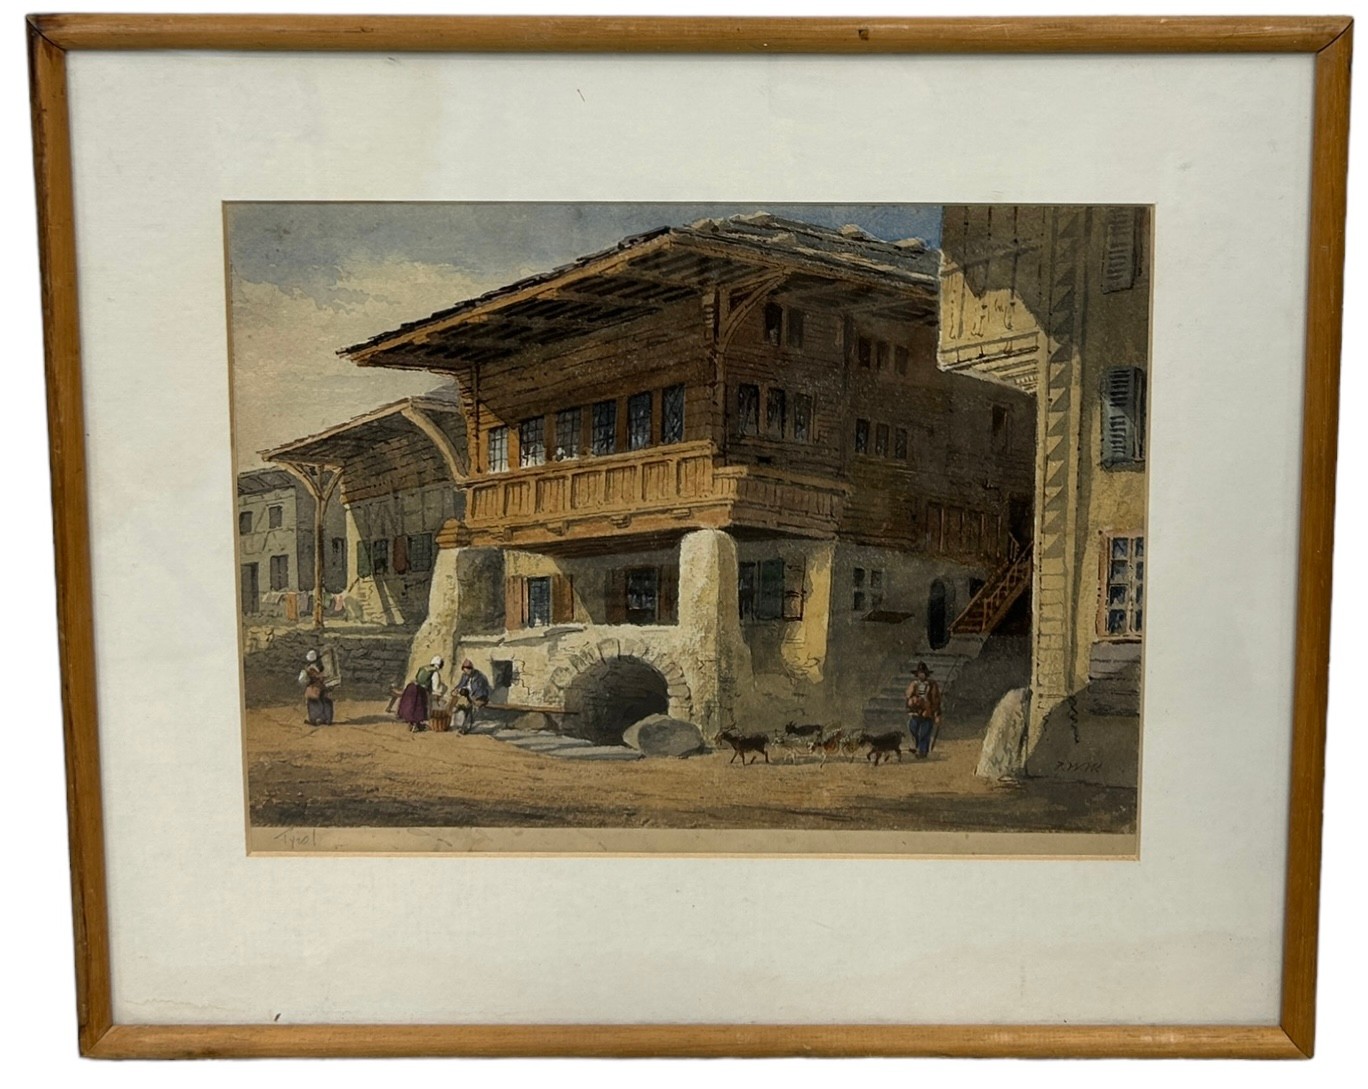 A 19TH CENTURY WATERCOLOUR PAINTING ON PAPER DEPICTING A TYROLEAN VILLAGE SCENE WITH LOCAL FOLK, - Image 2 of 5